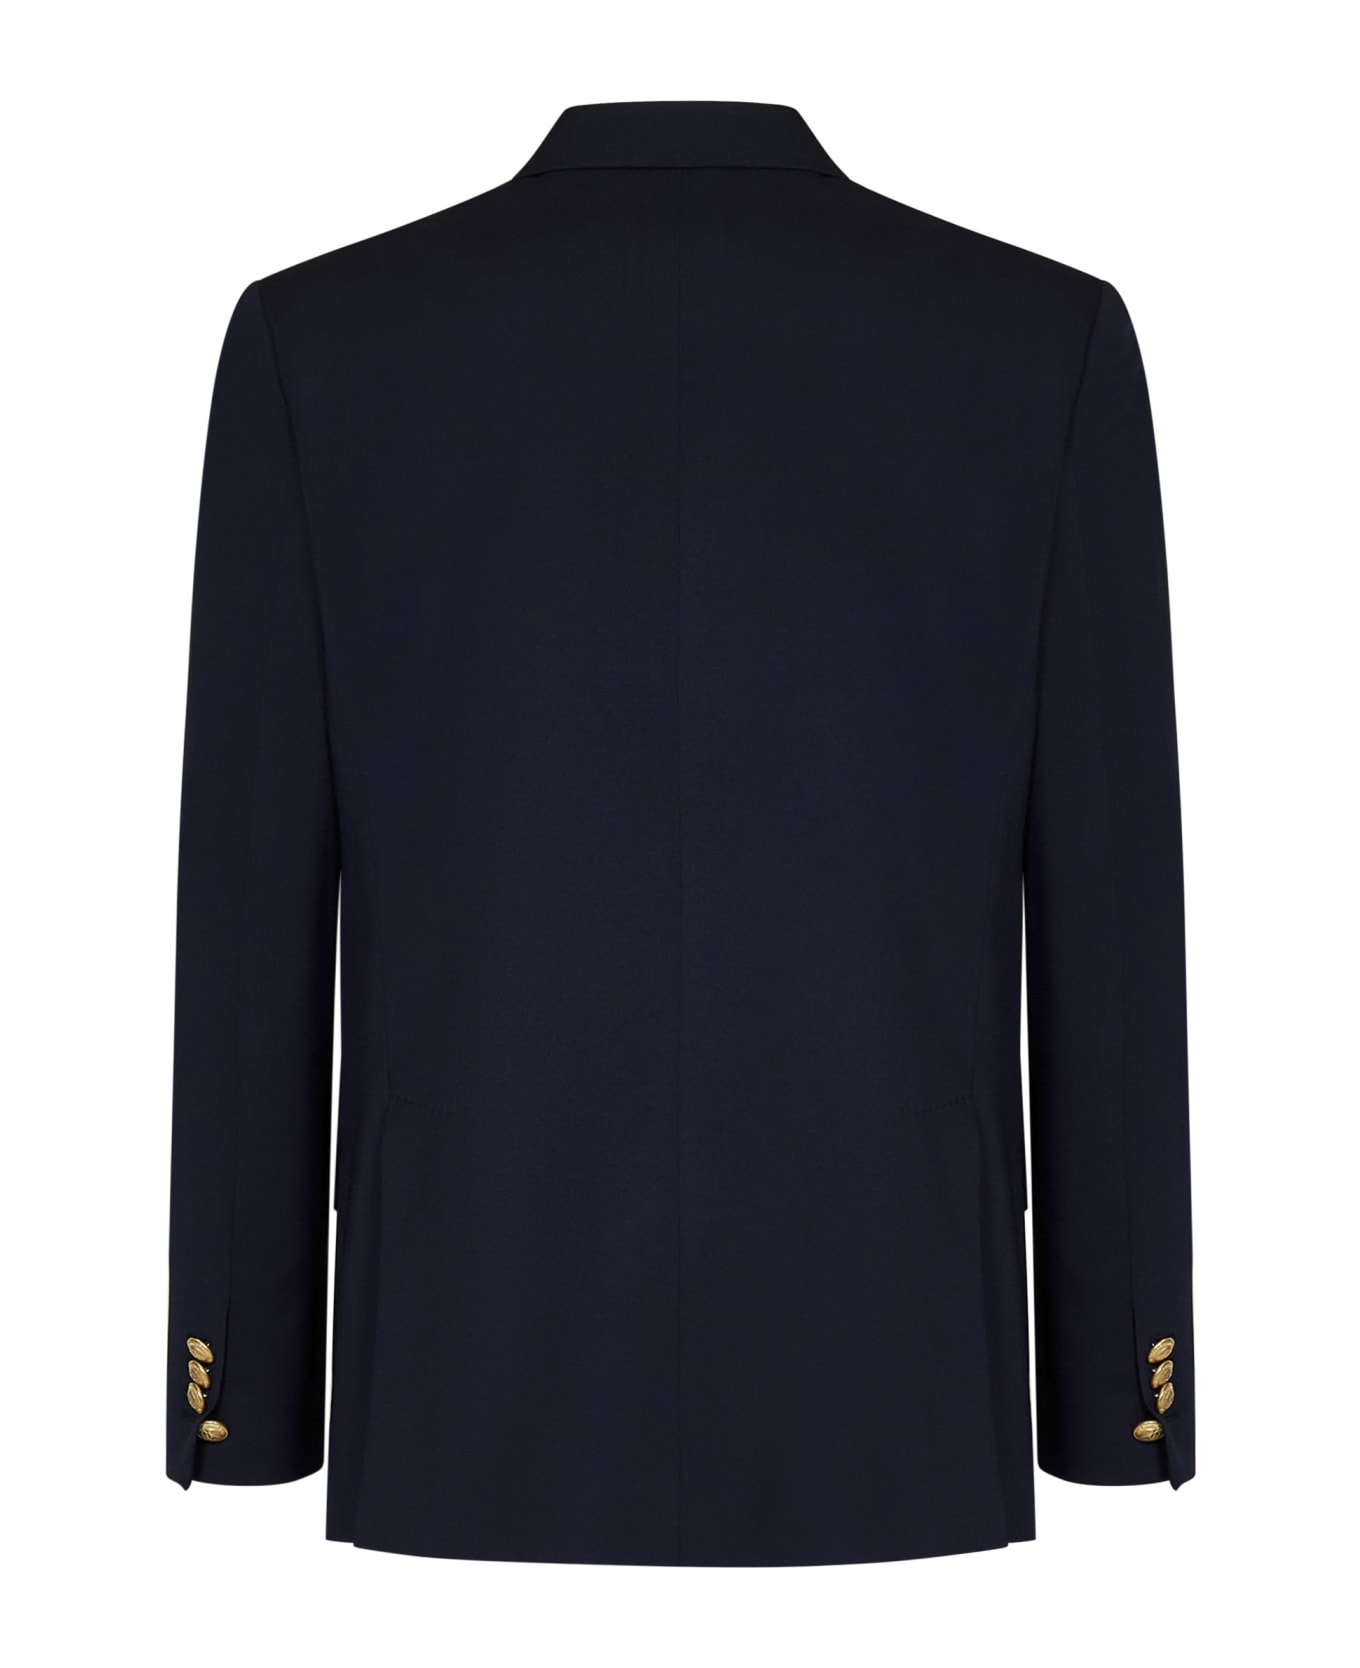 Dsquared2 Palm Beach Double Breasted Blazer - Navy Blue